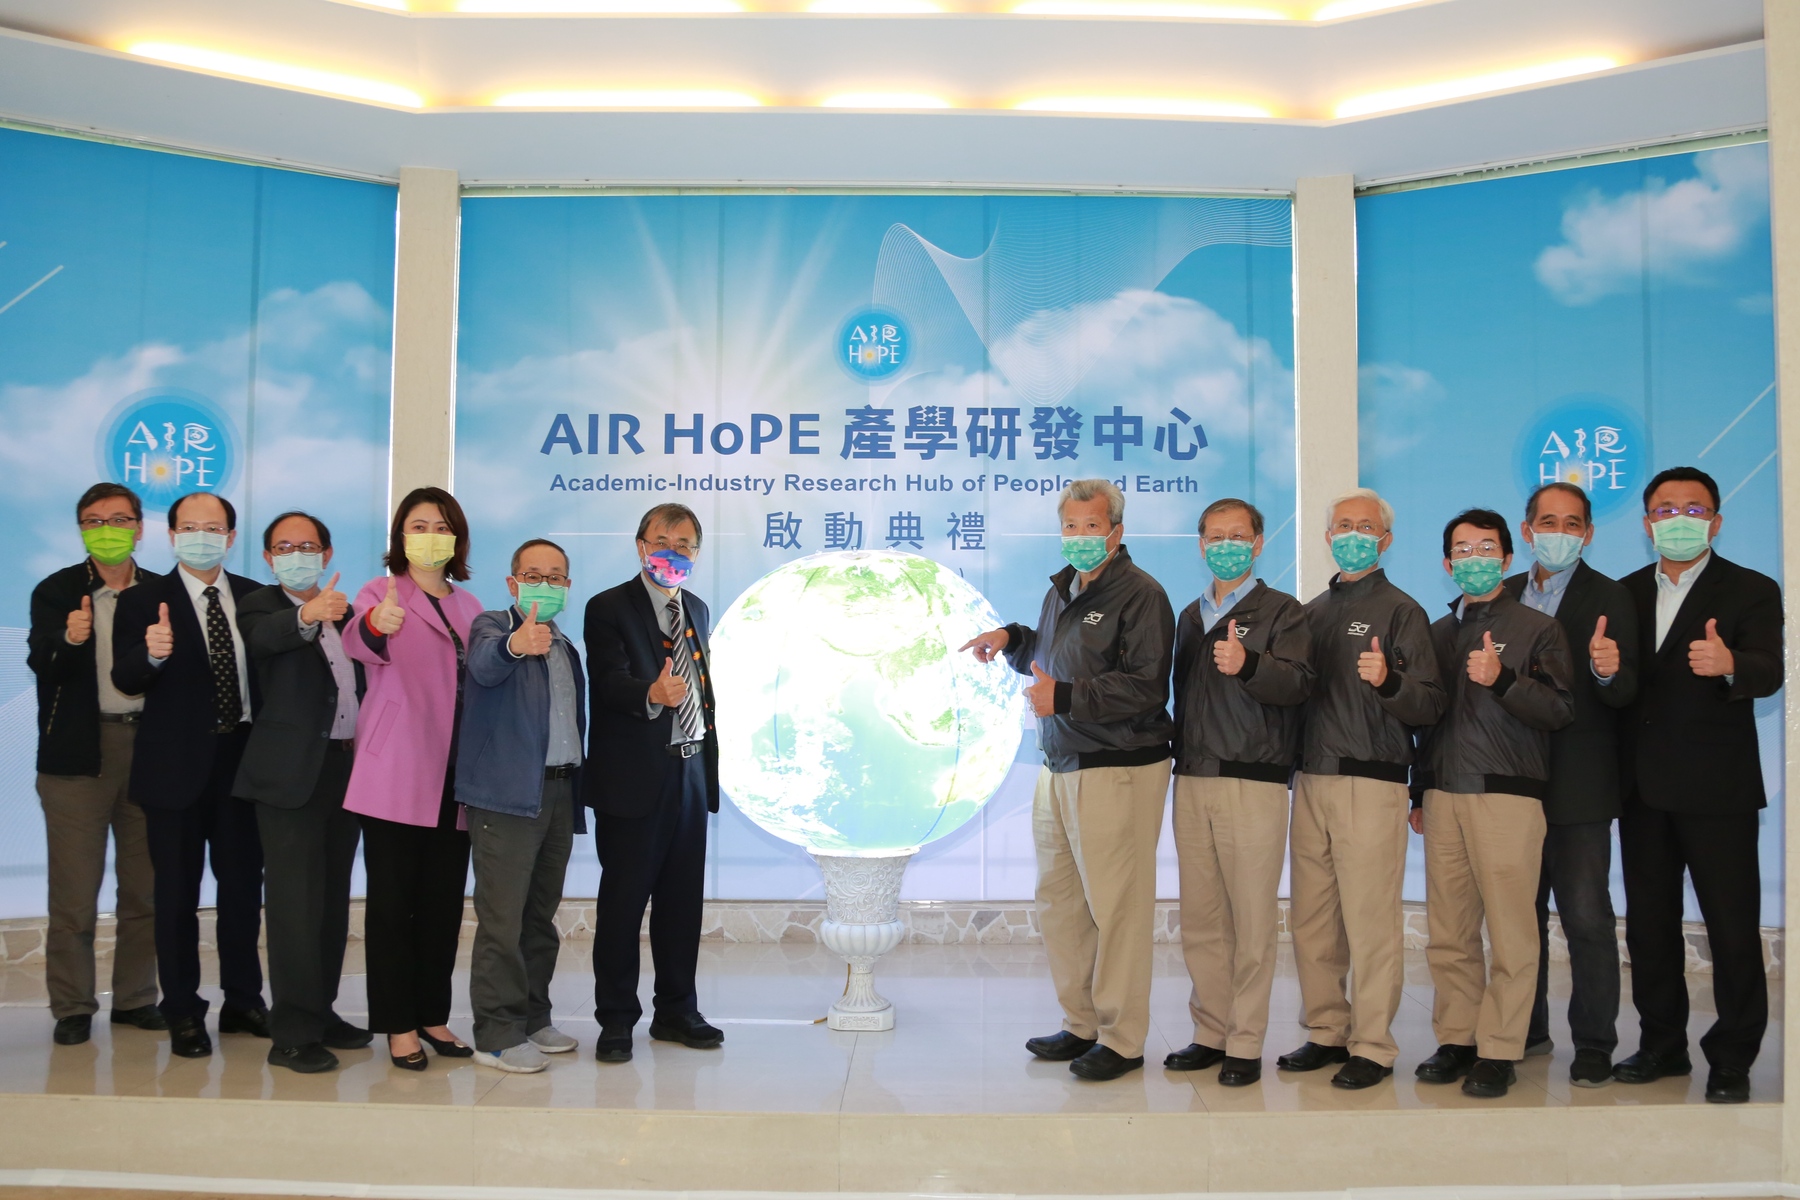 NSYSU and China Steel establish AIR HoPE to safeguard air quality